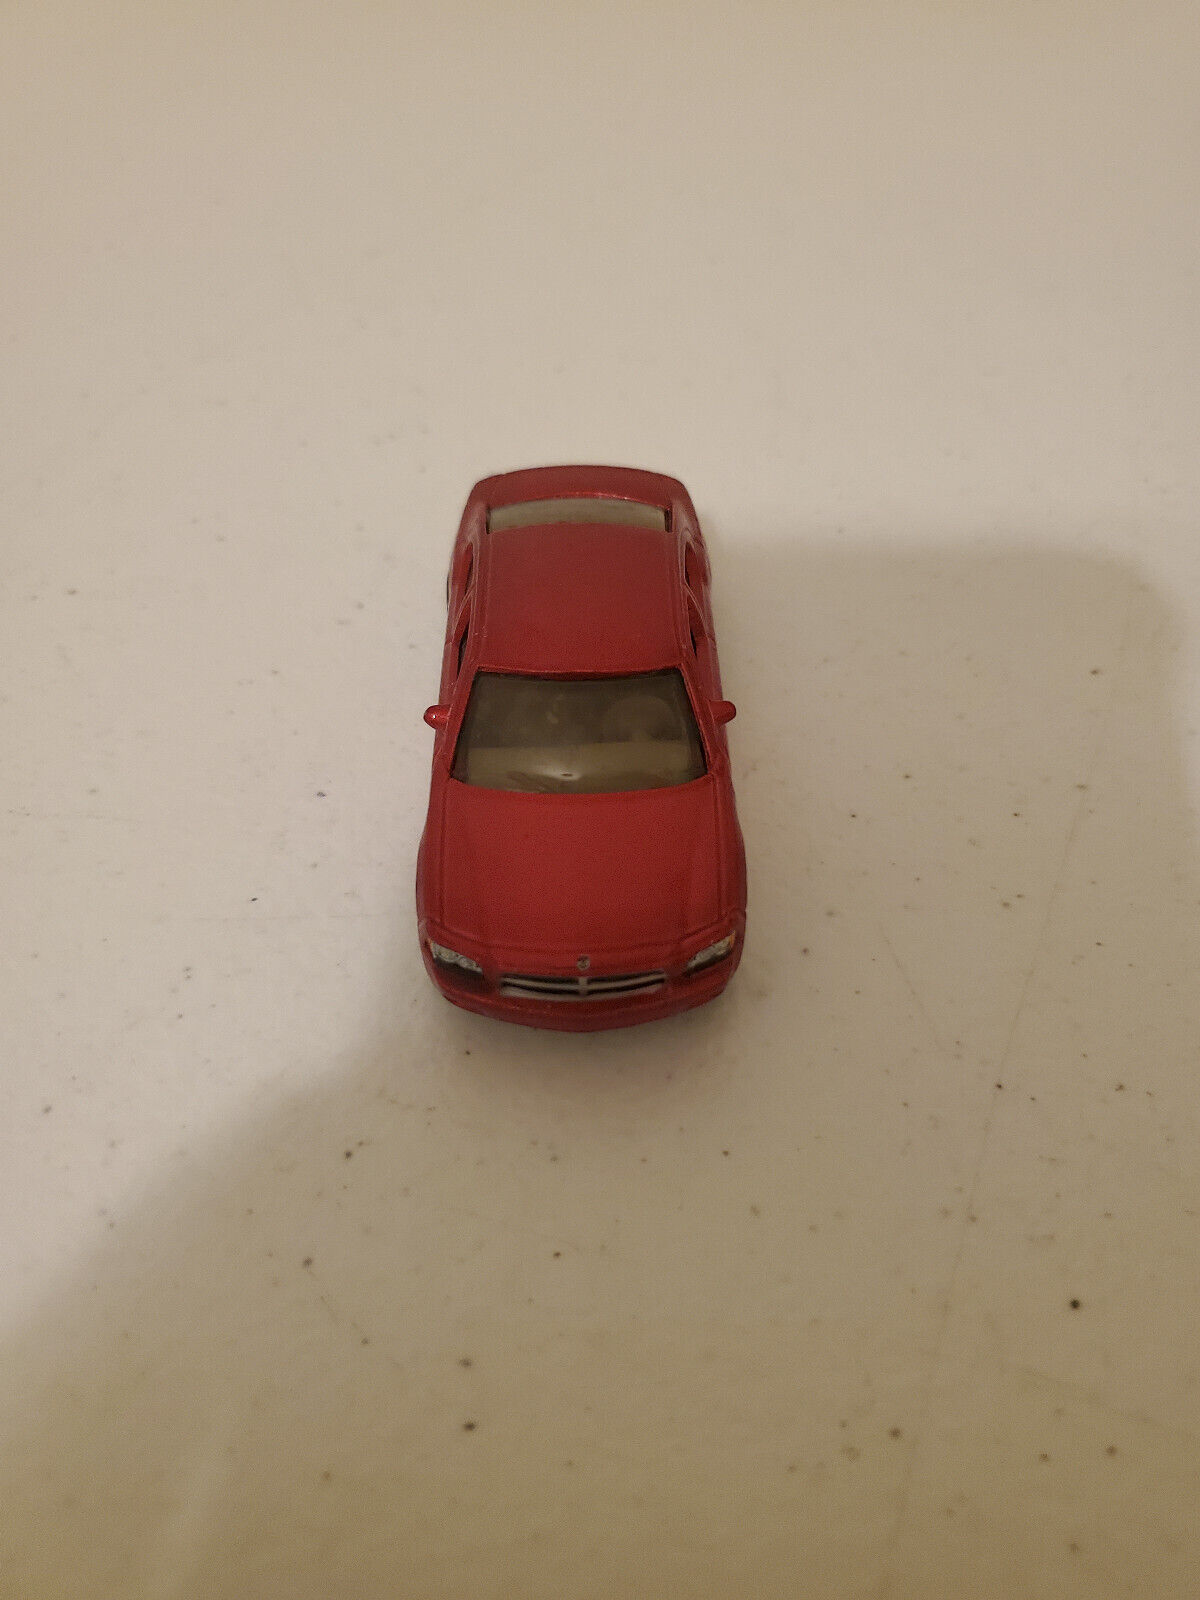 2004 Matchbox - 2005 Dodge Charger - MB676 - Red